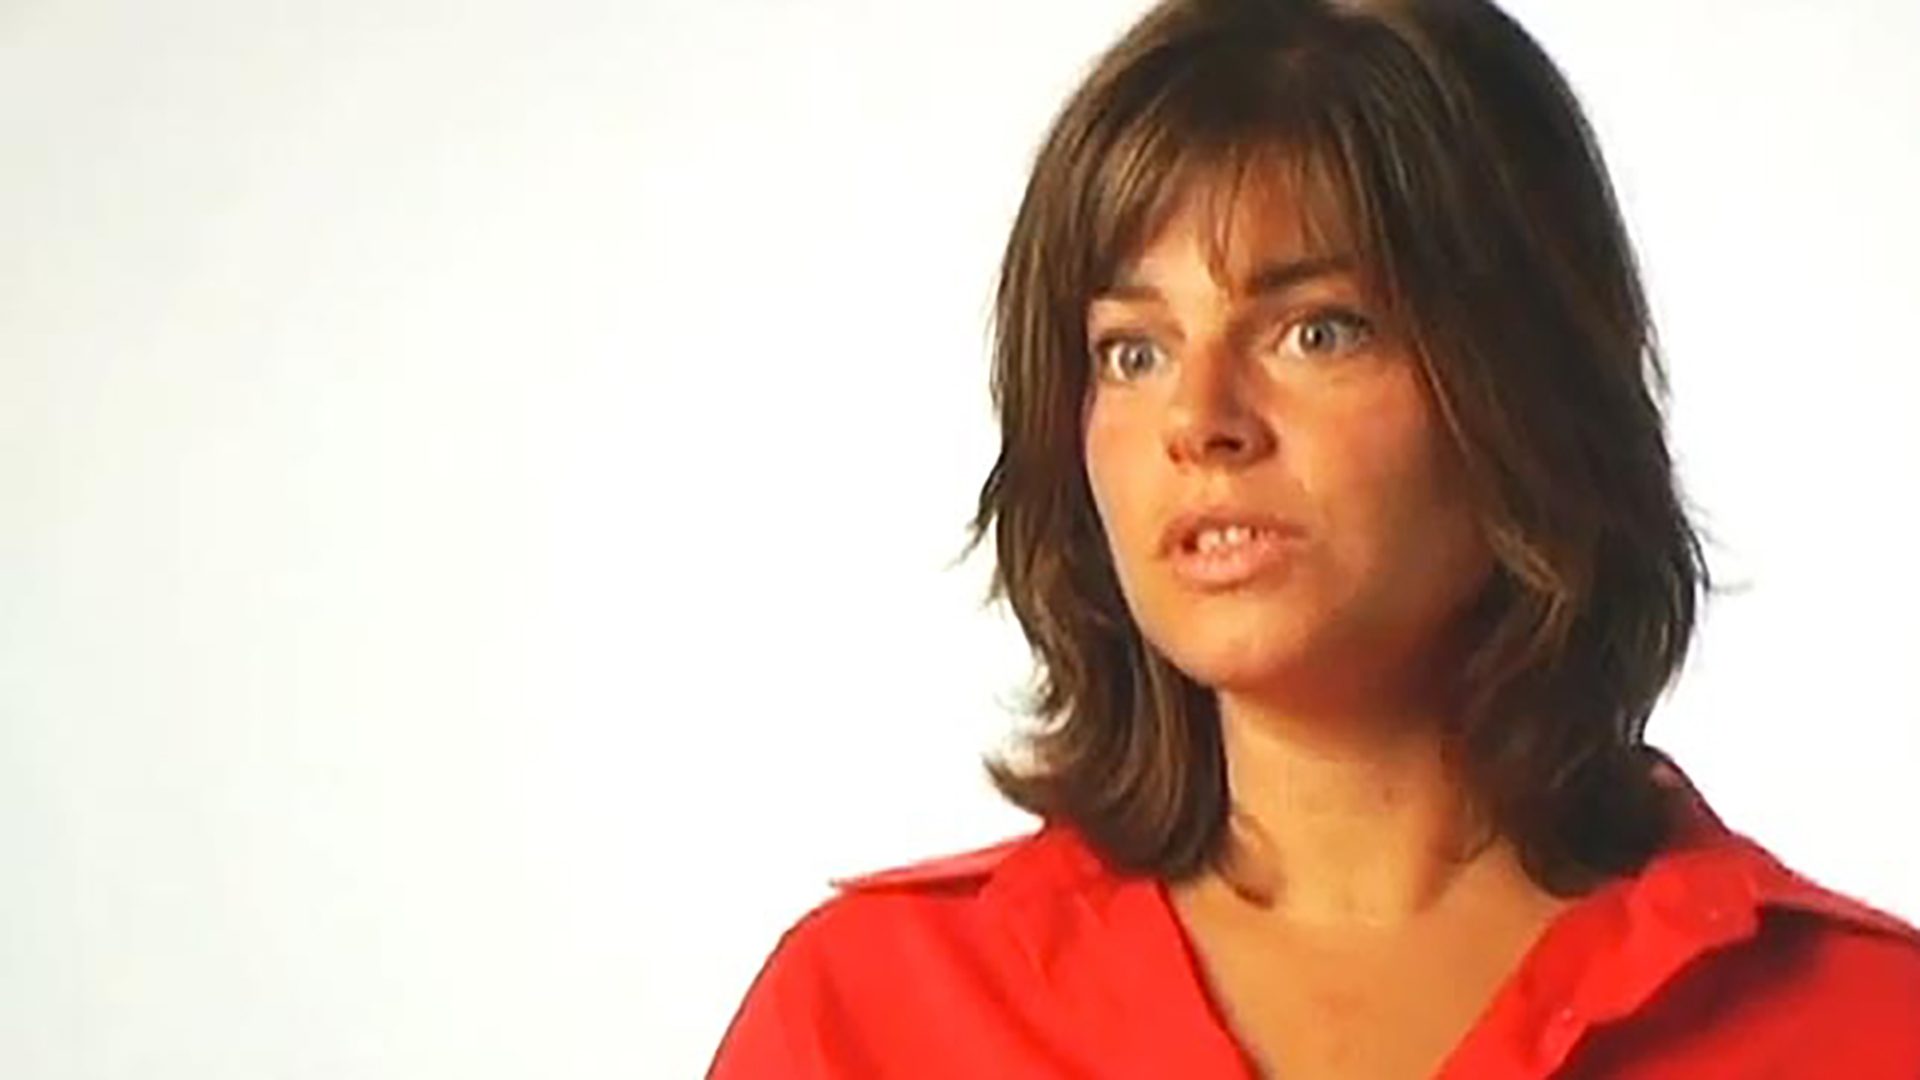 A young woman with shoulder-length brown hair wears a red shirt and is interviewed against a white background.